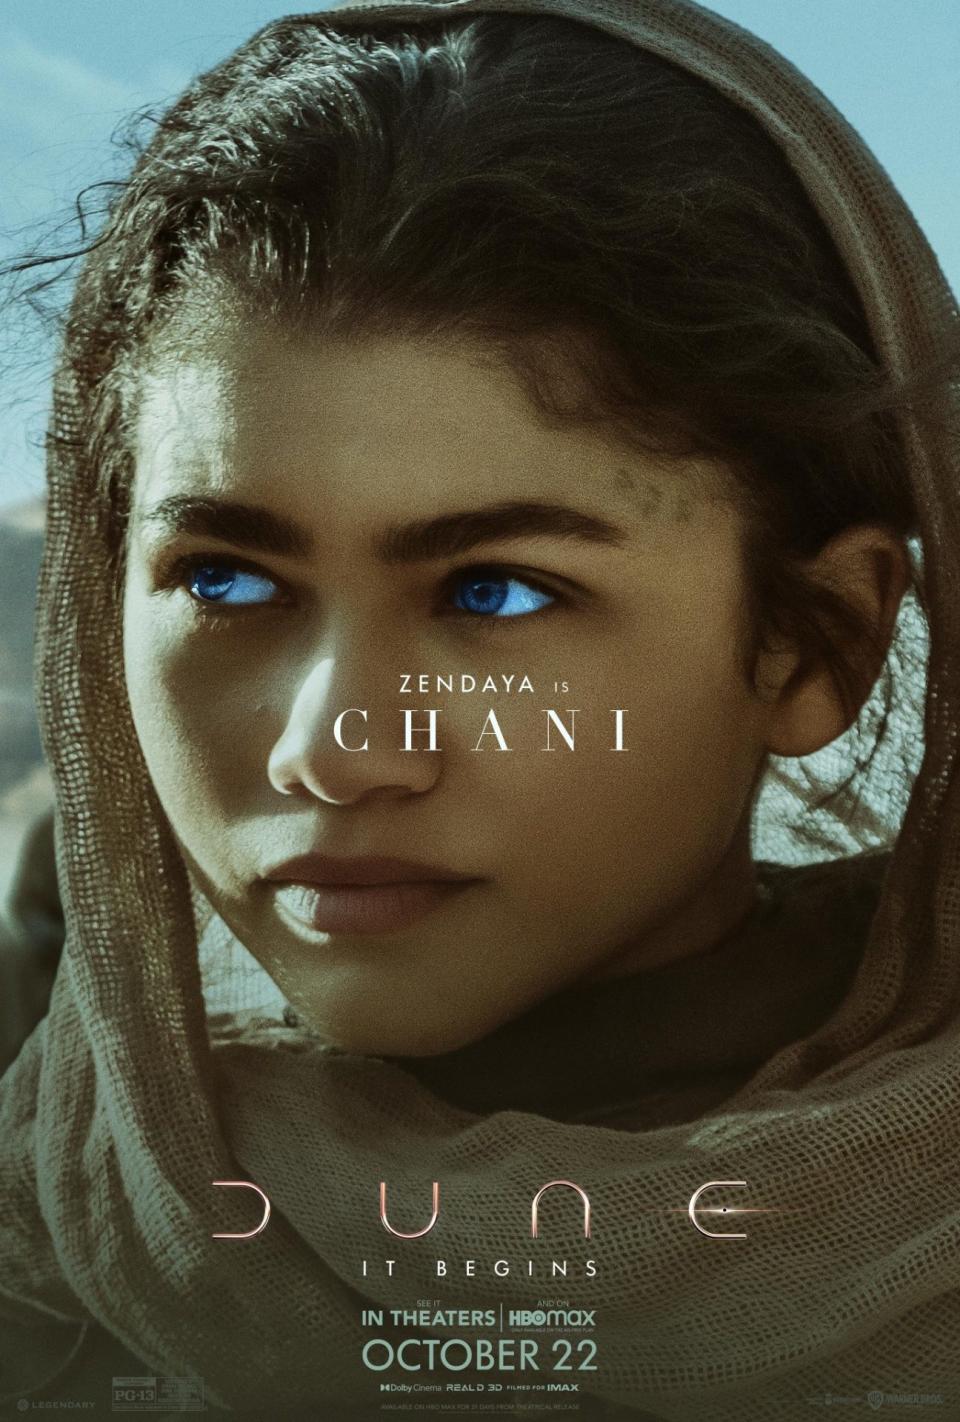 Dune character poster depicting Chani